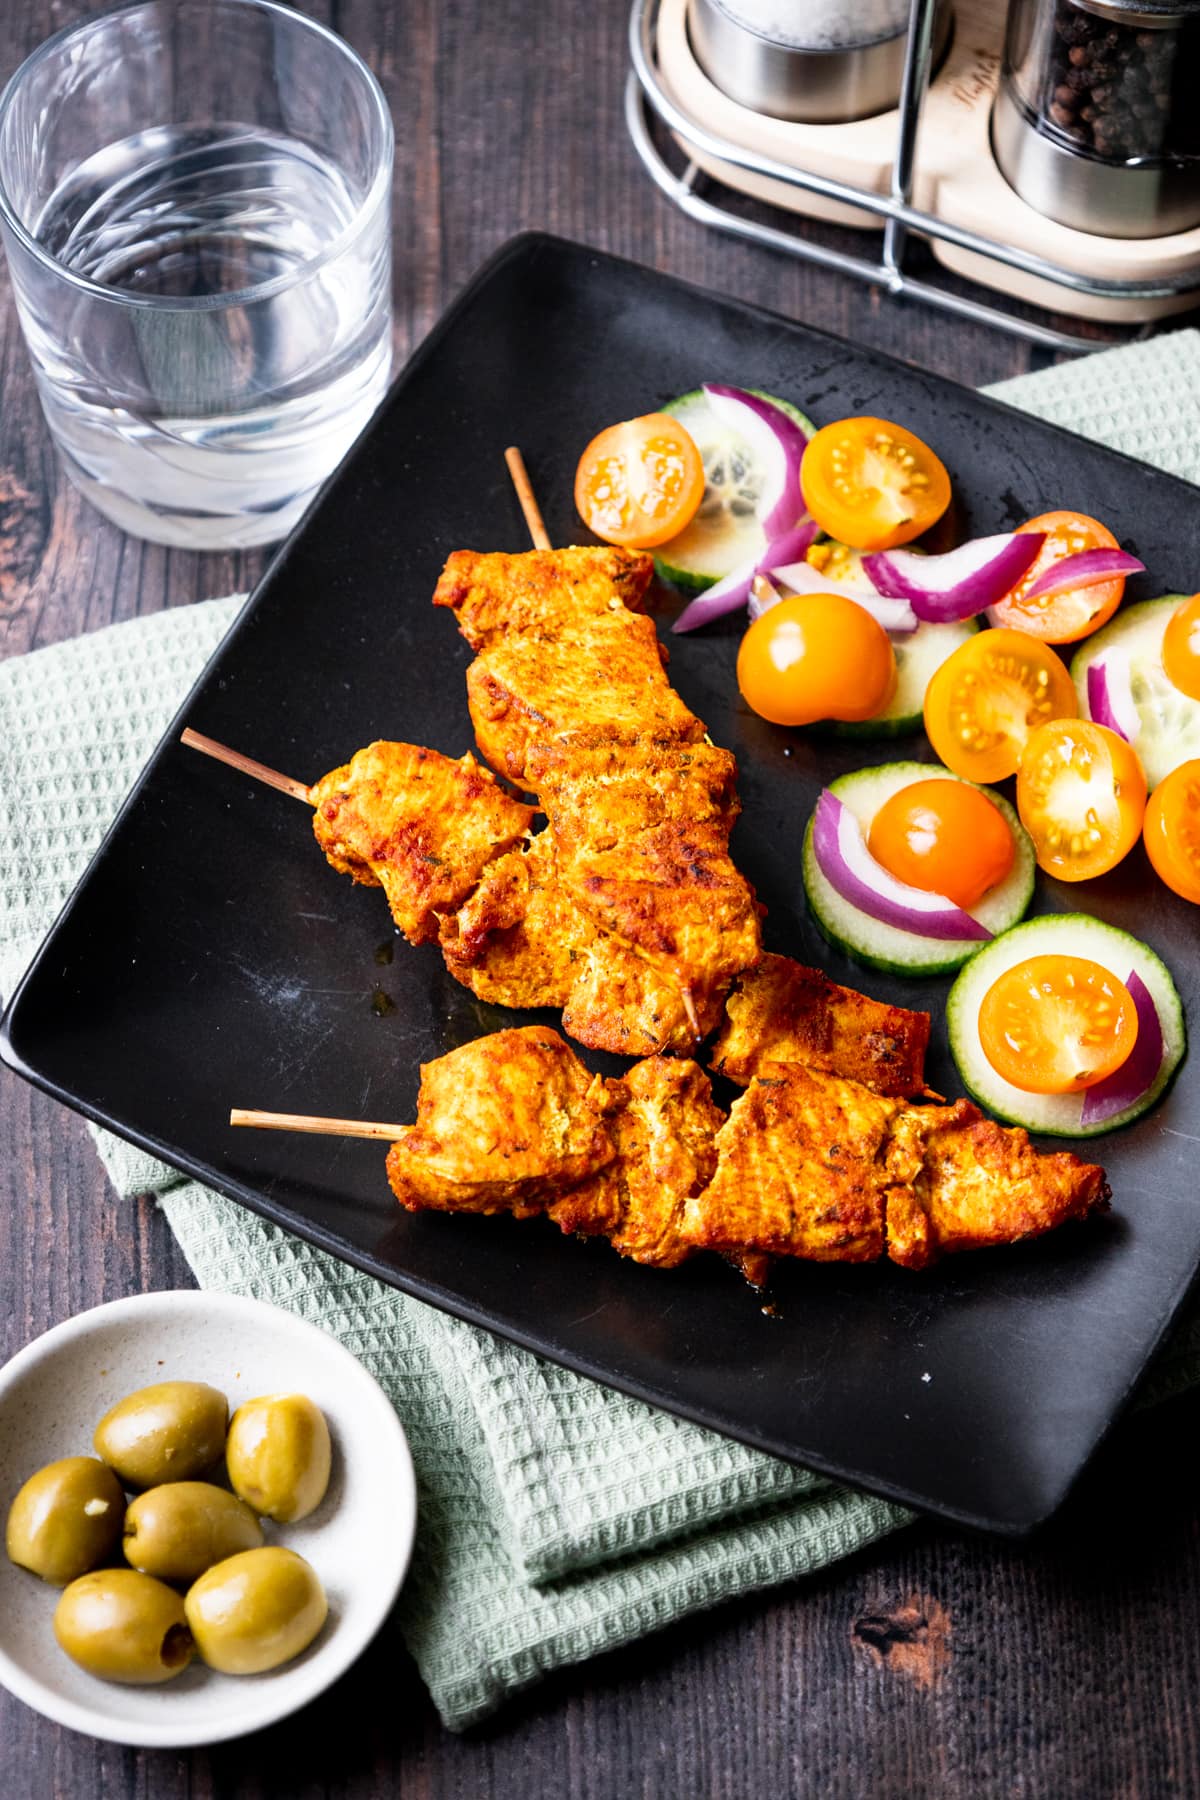 Spanish chicken kebabs with salad and olives